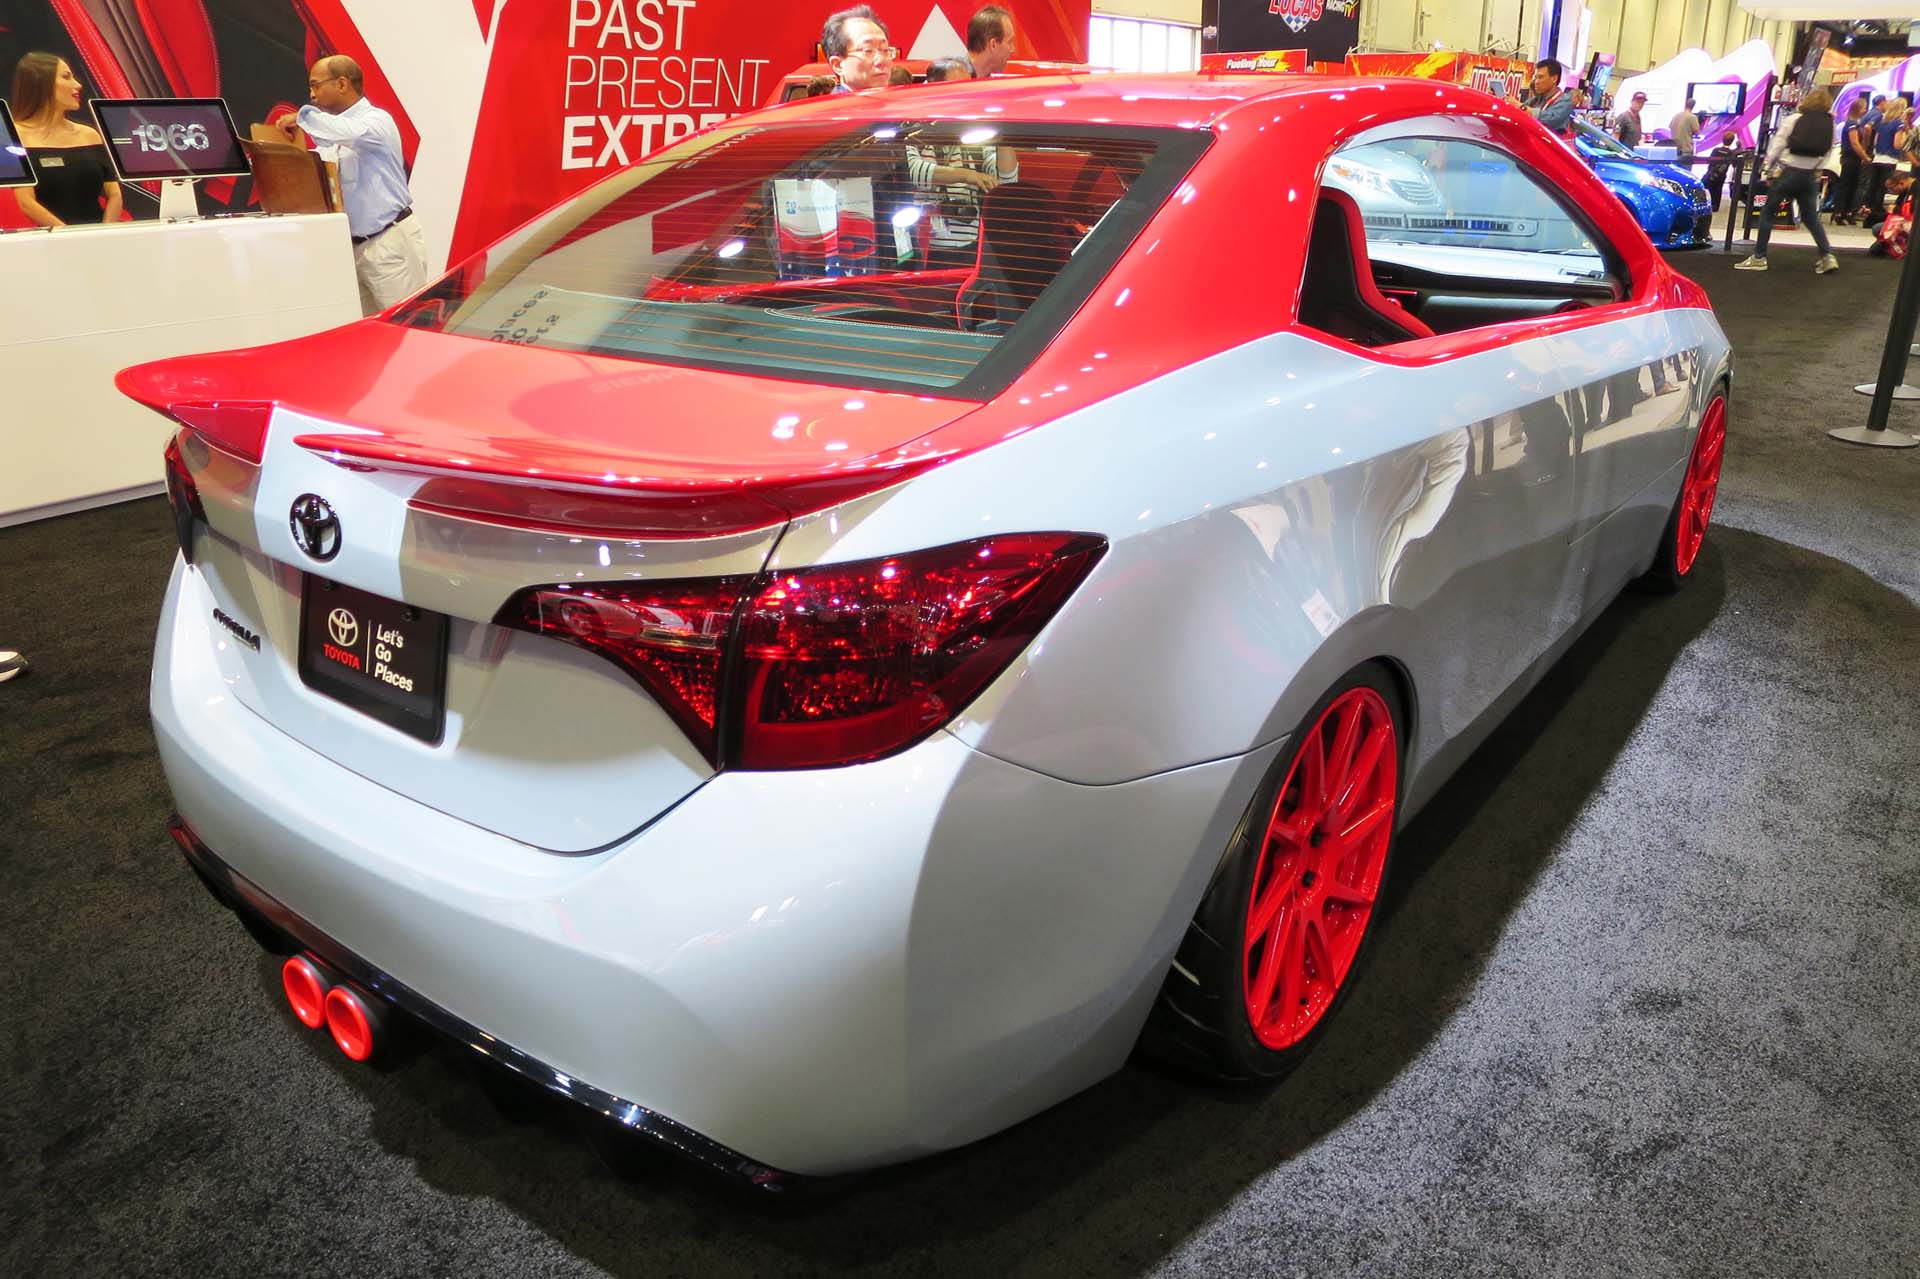 Built by Toyota and Cartel Customs, the “XTREME Corolla” is transformed into a two-door hardtop and includes a Garrett turbocharger, Cartel exhaust, and floating centre console.